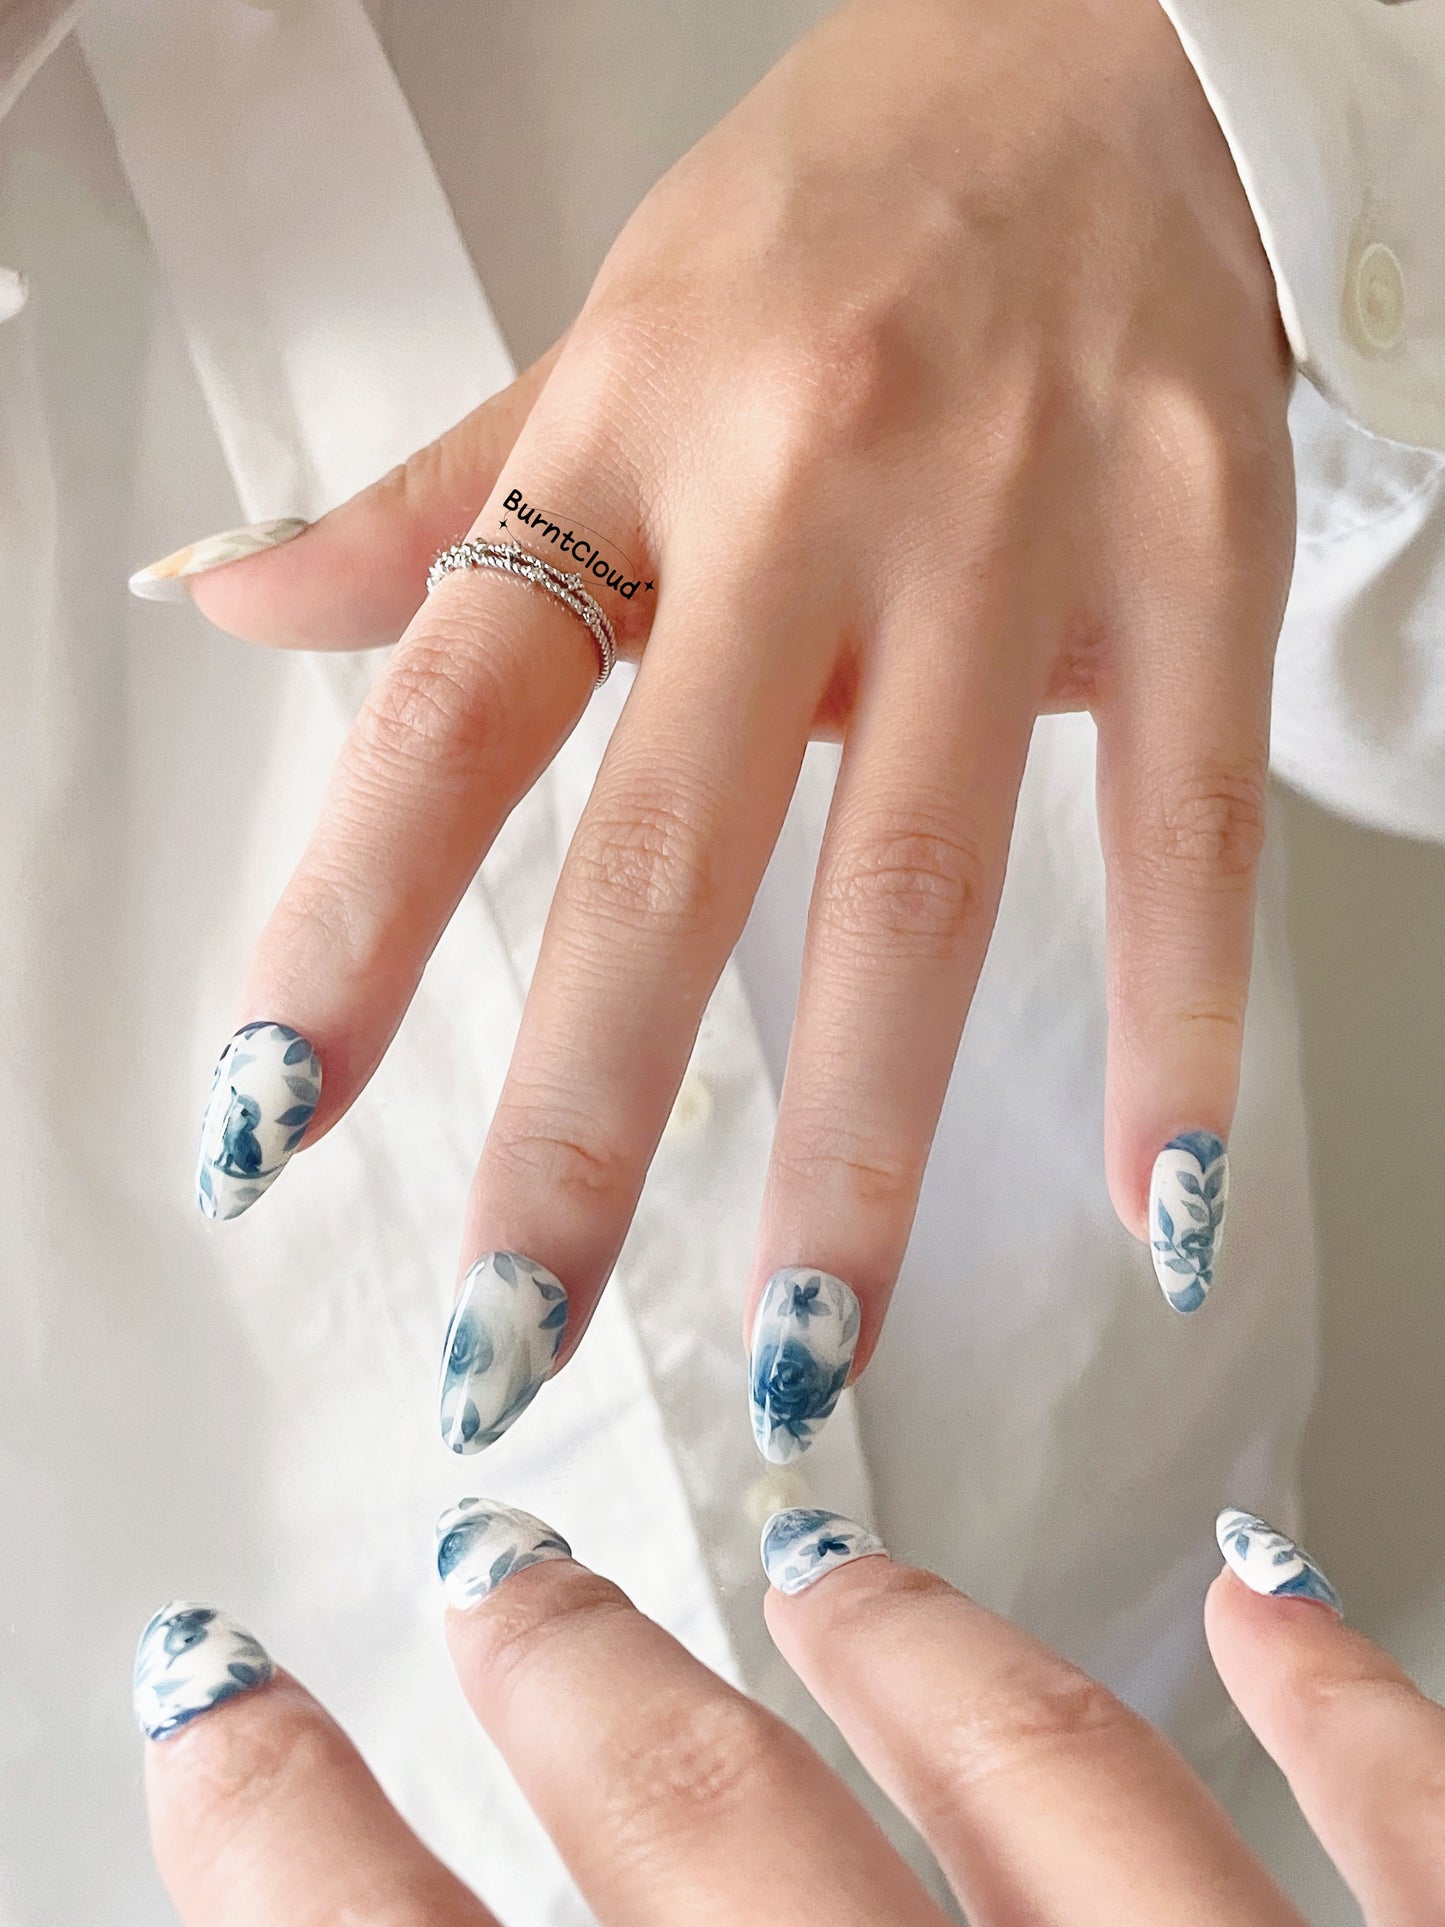 "Waiting for Rain" Blue Porcelain and Birds Watercolour Painting Nails | 31 Custom Handpainted Press on Nails